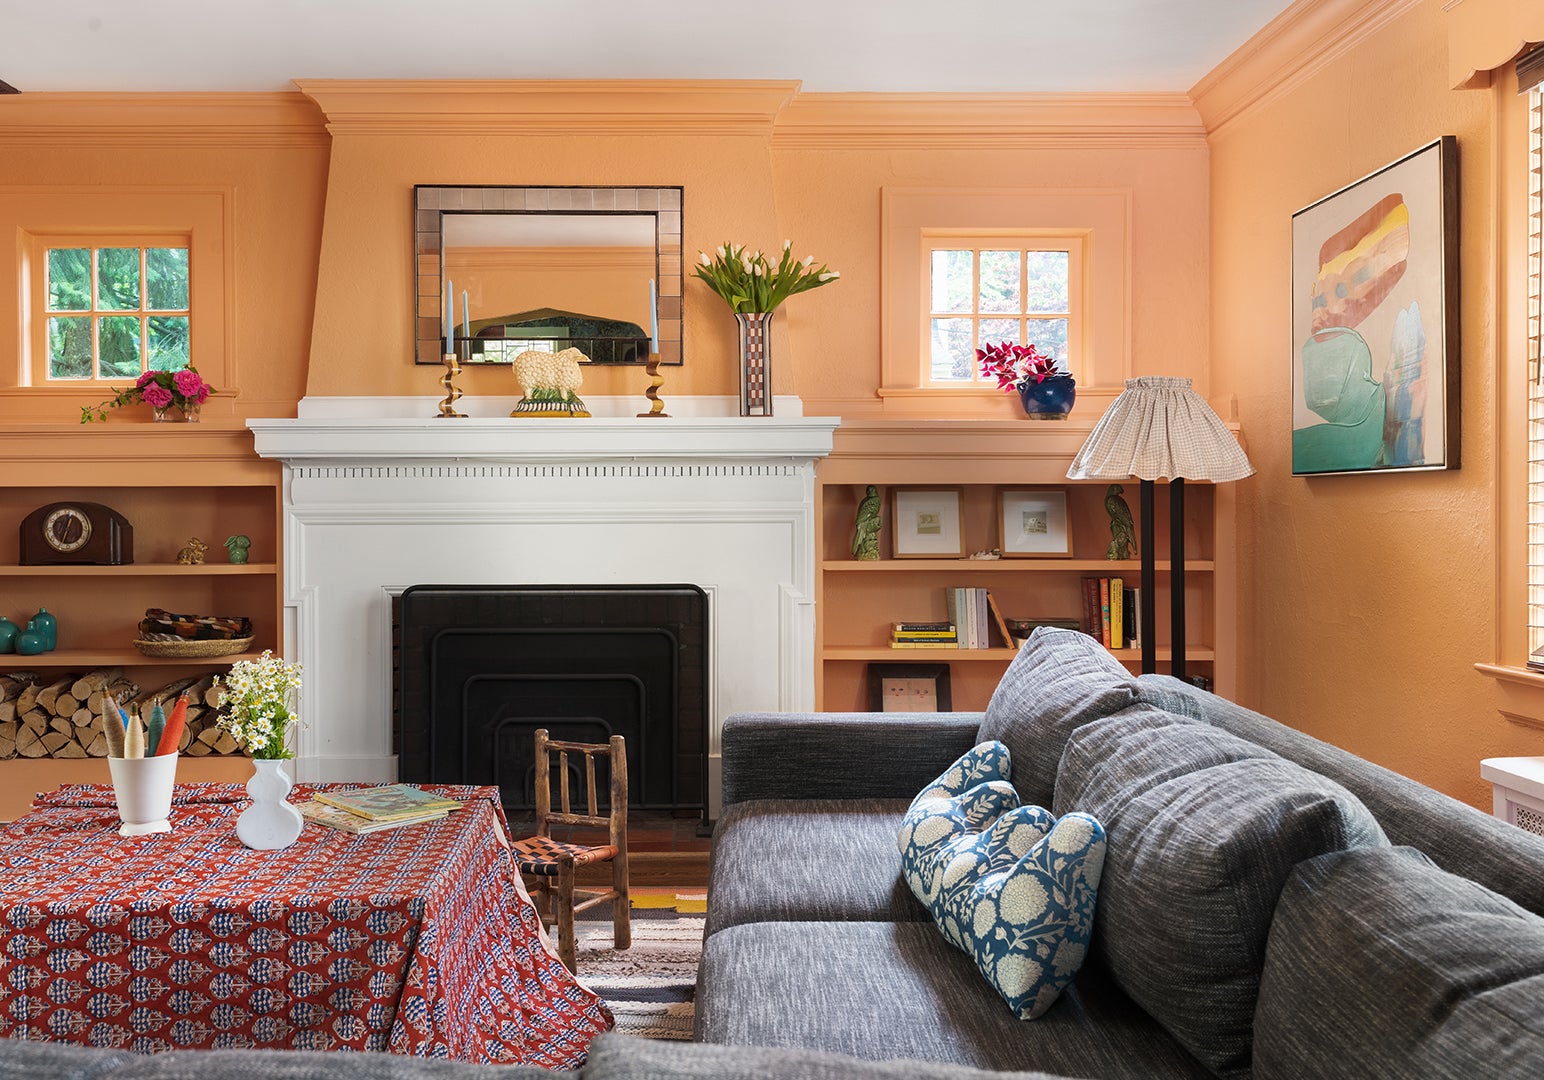 peach living room with built-in fireplace shelves